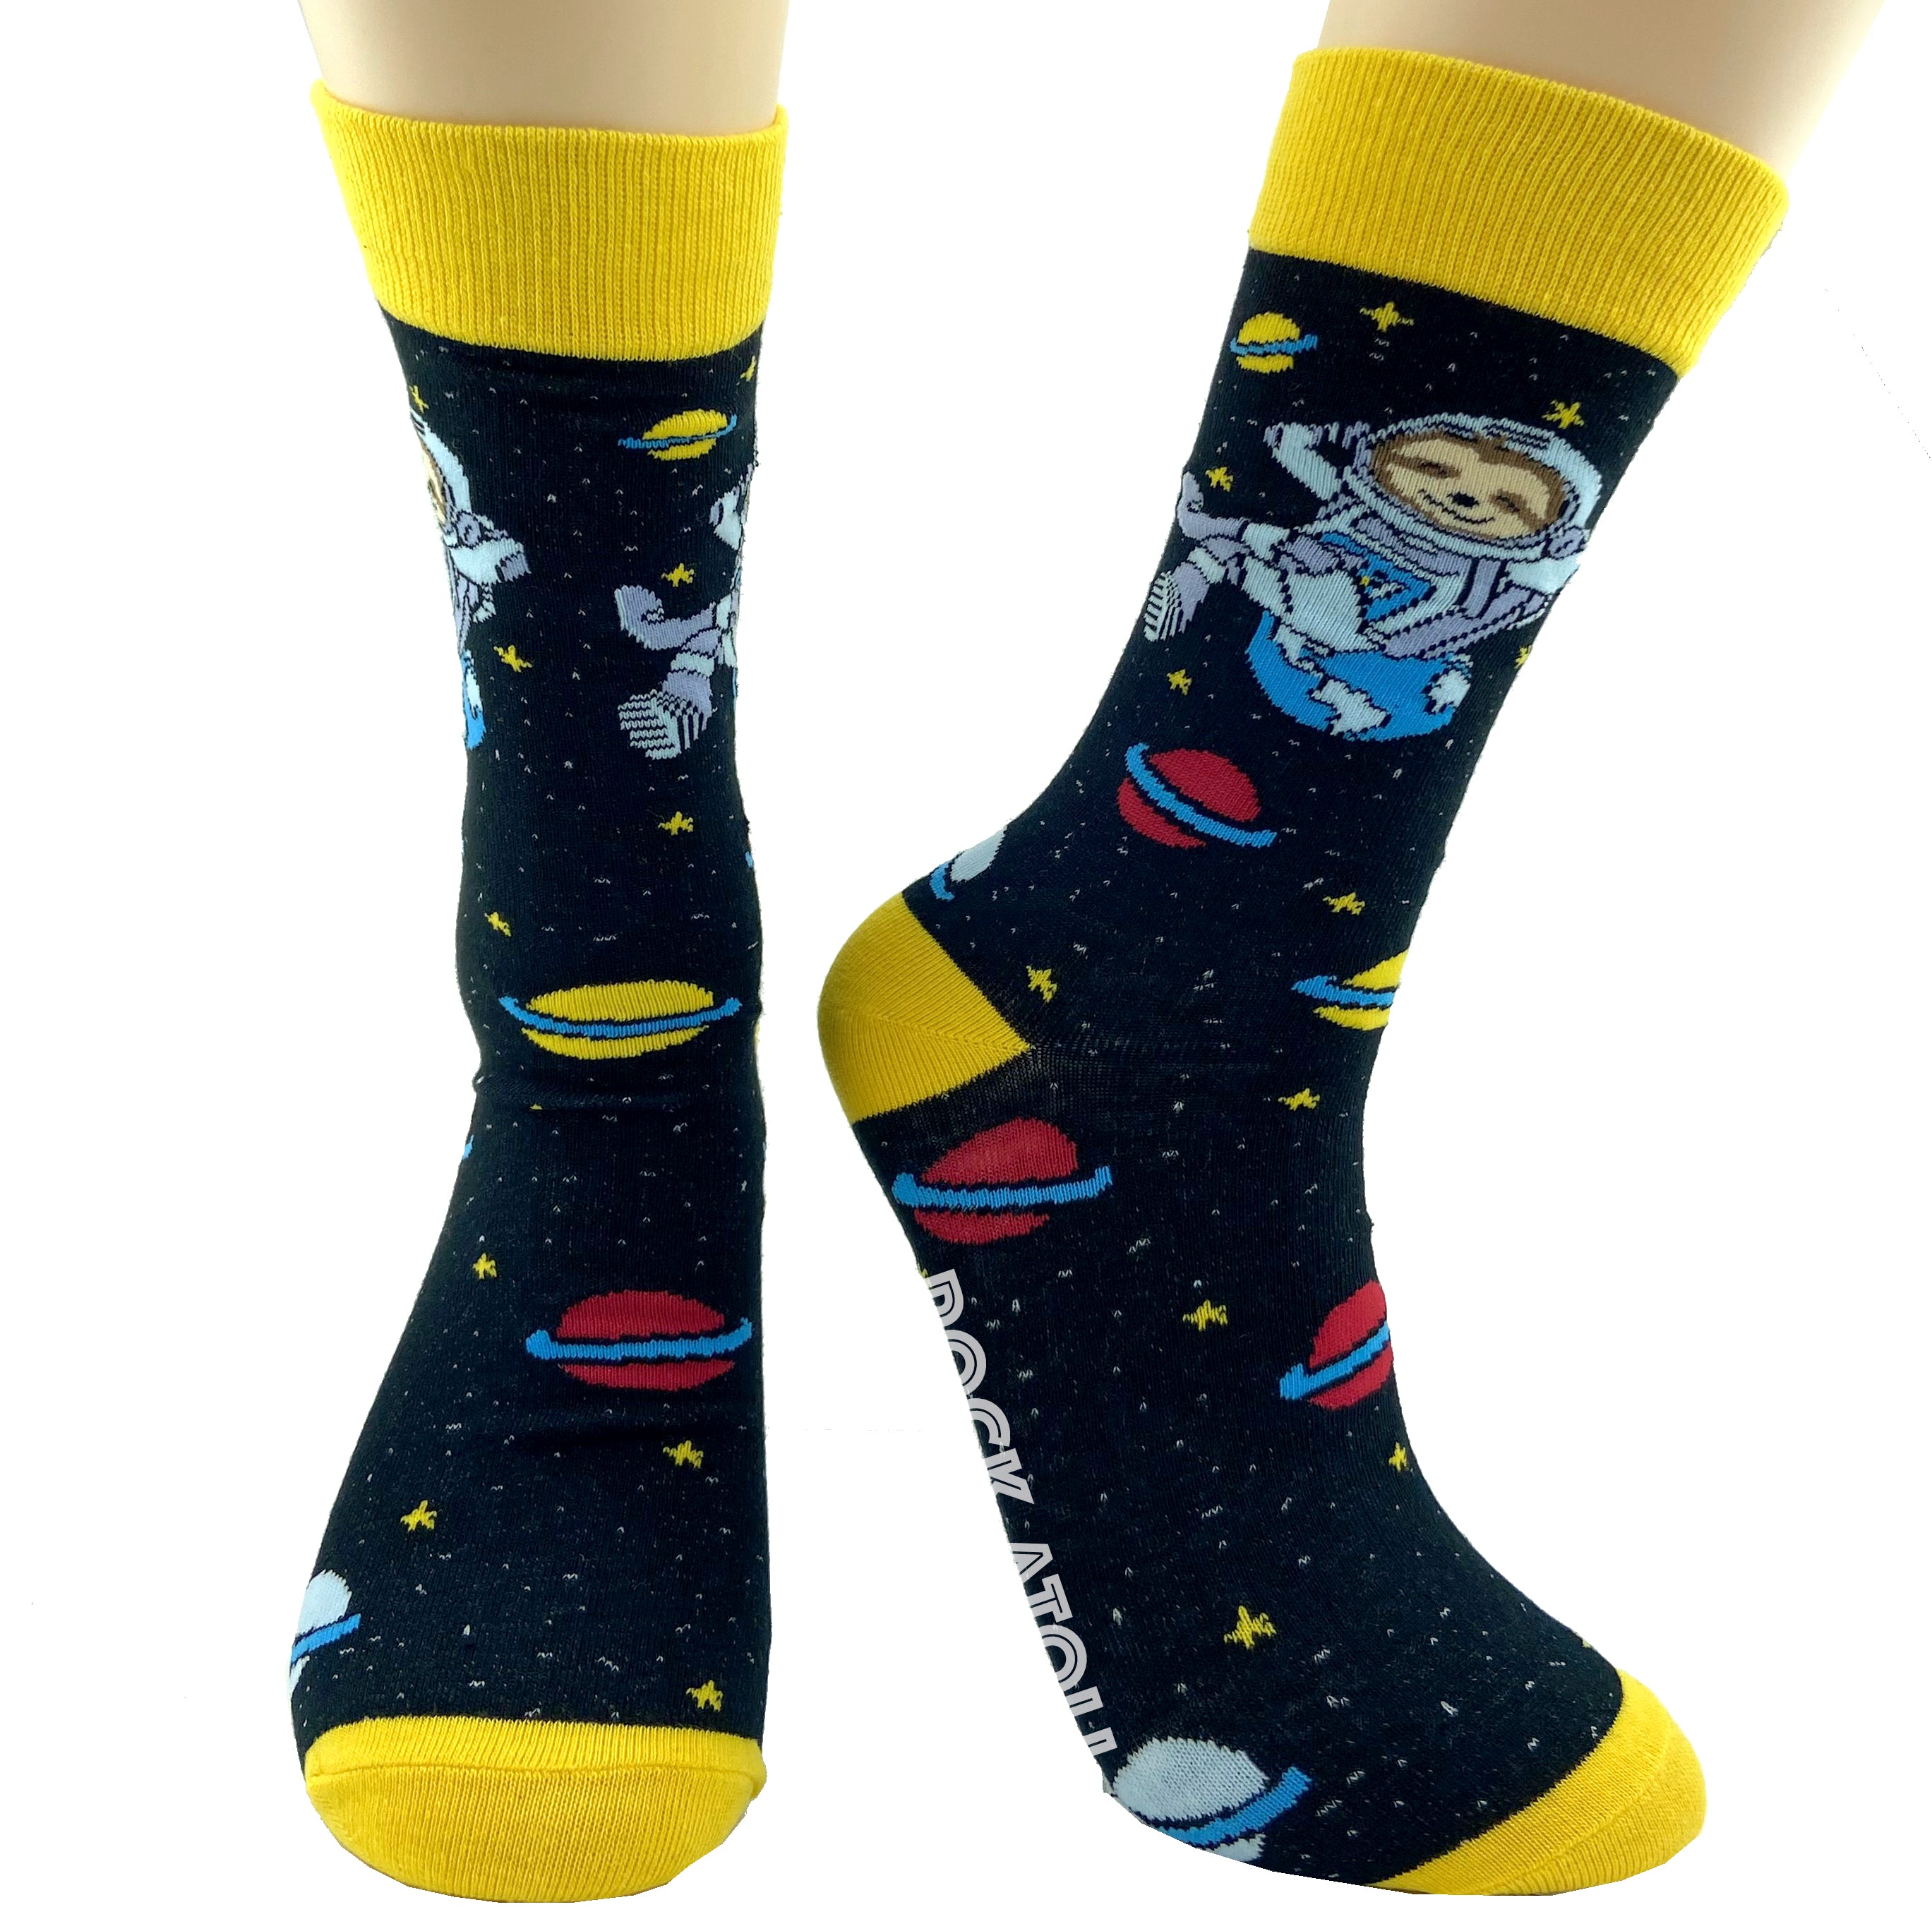 Sloth Astronaut Chilling In Outer Space Patterned Unisex Novelty Socks